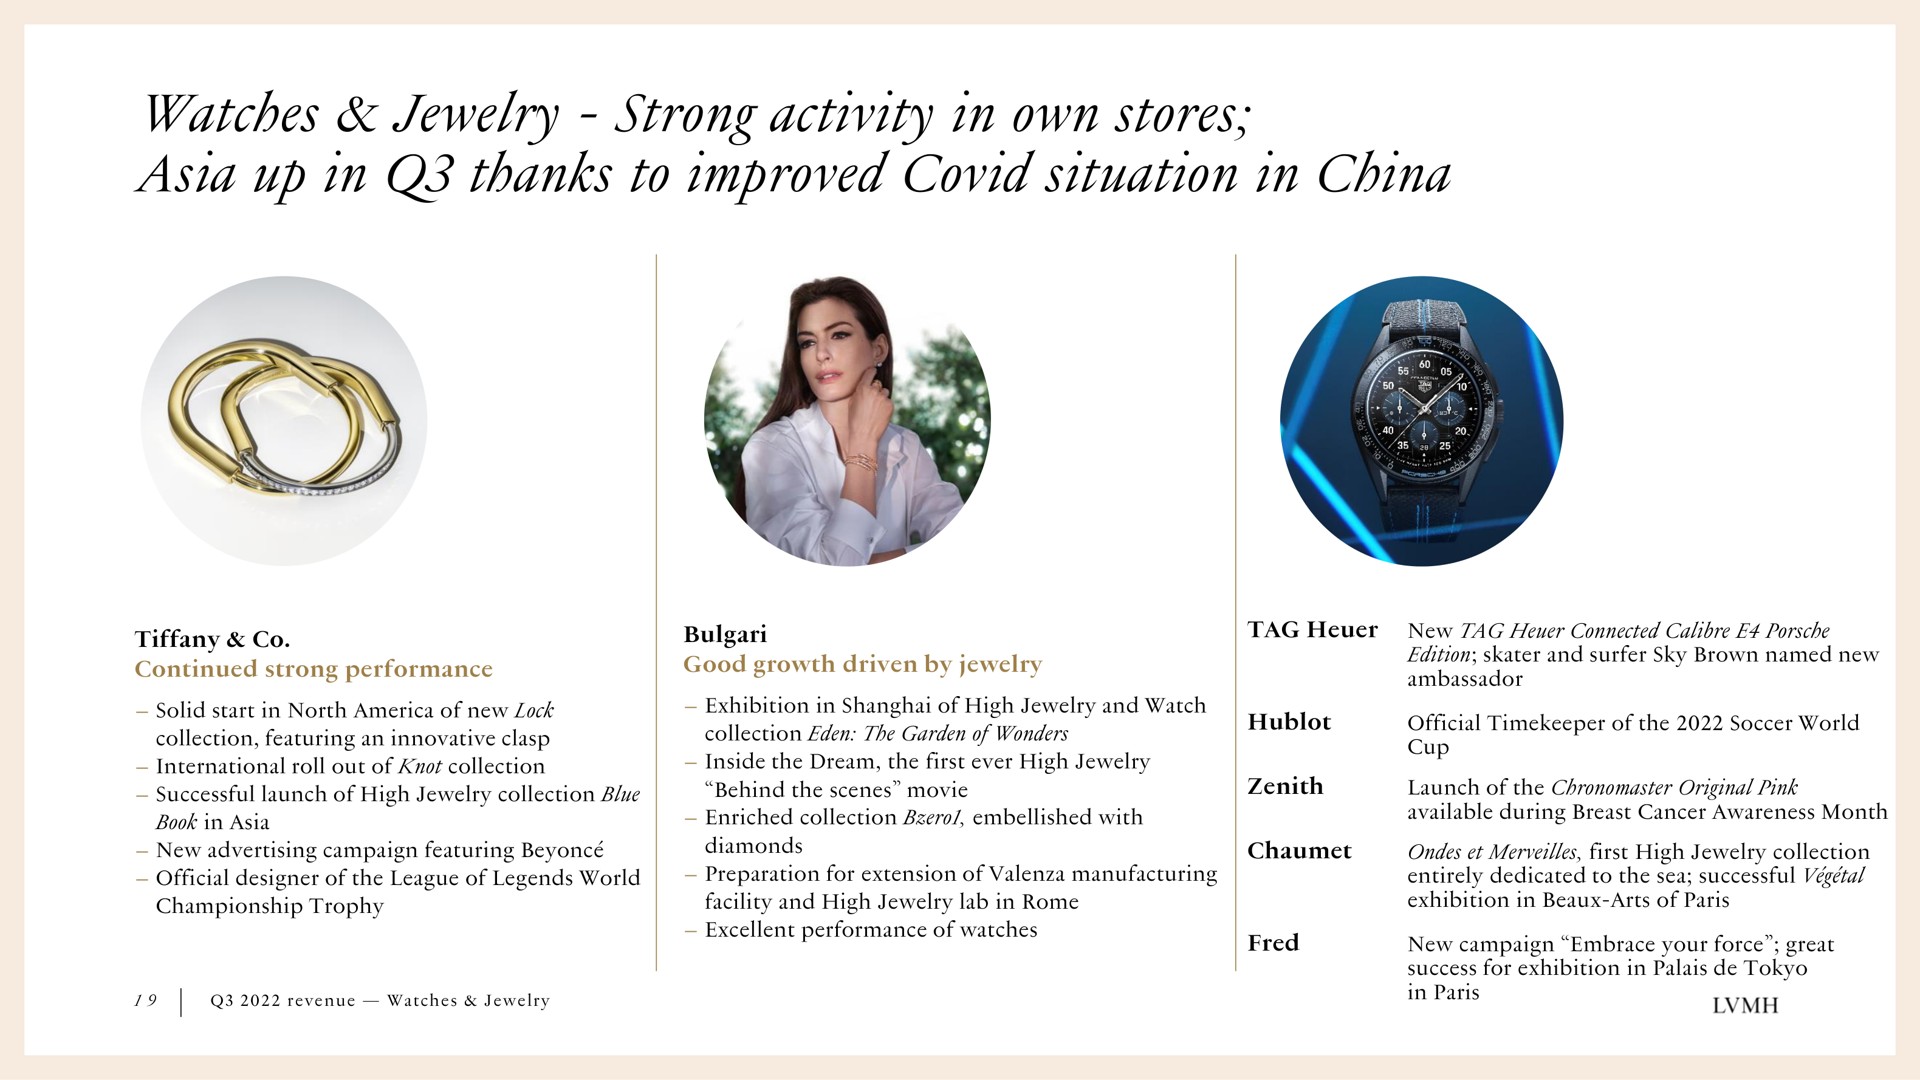 watches jewelry strong activity in own stores up in thanks to improved covid situation in china | LVMH